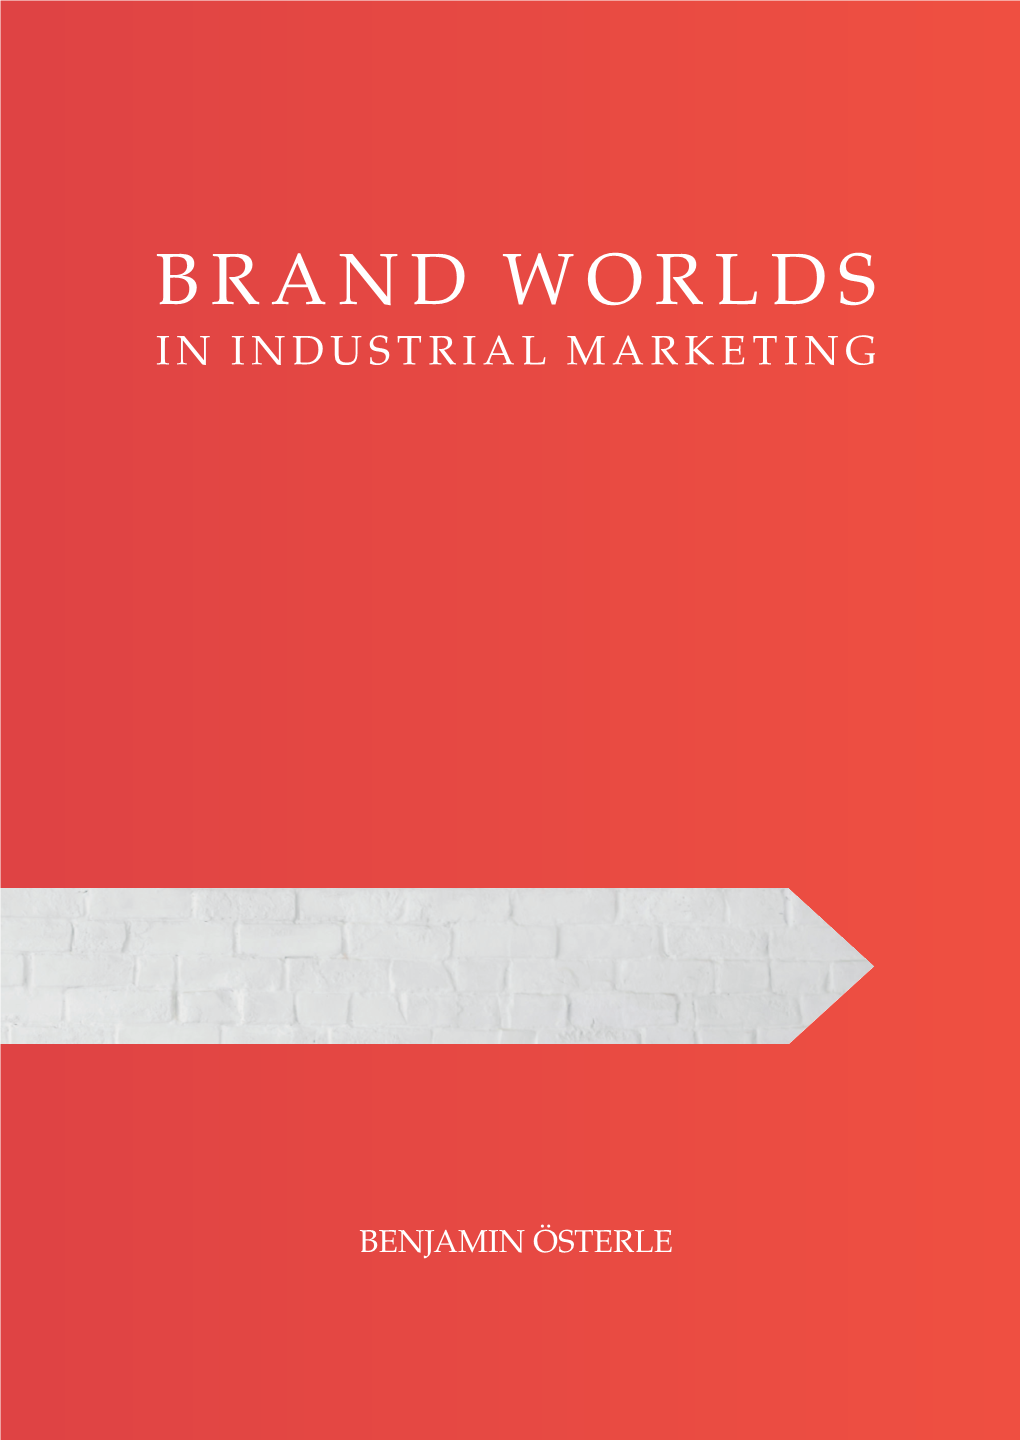 Brand Worlds in Industrial Marketing, Operating Companies